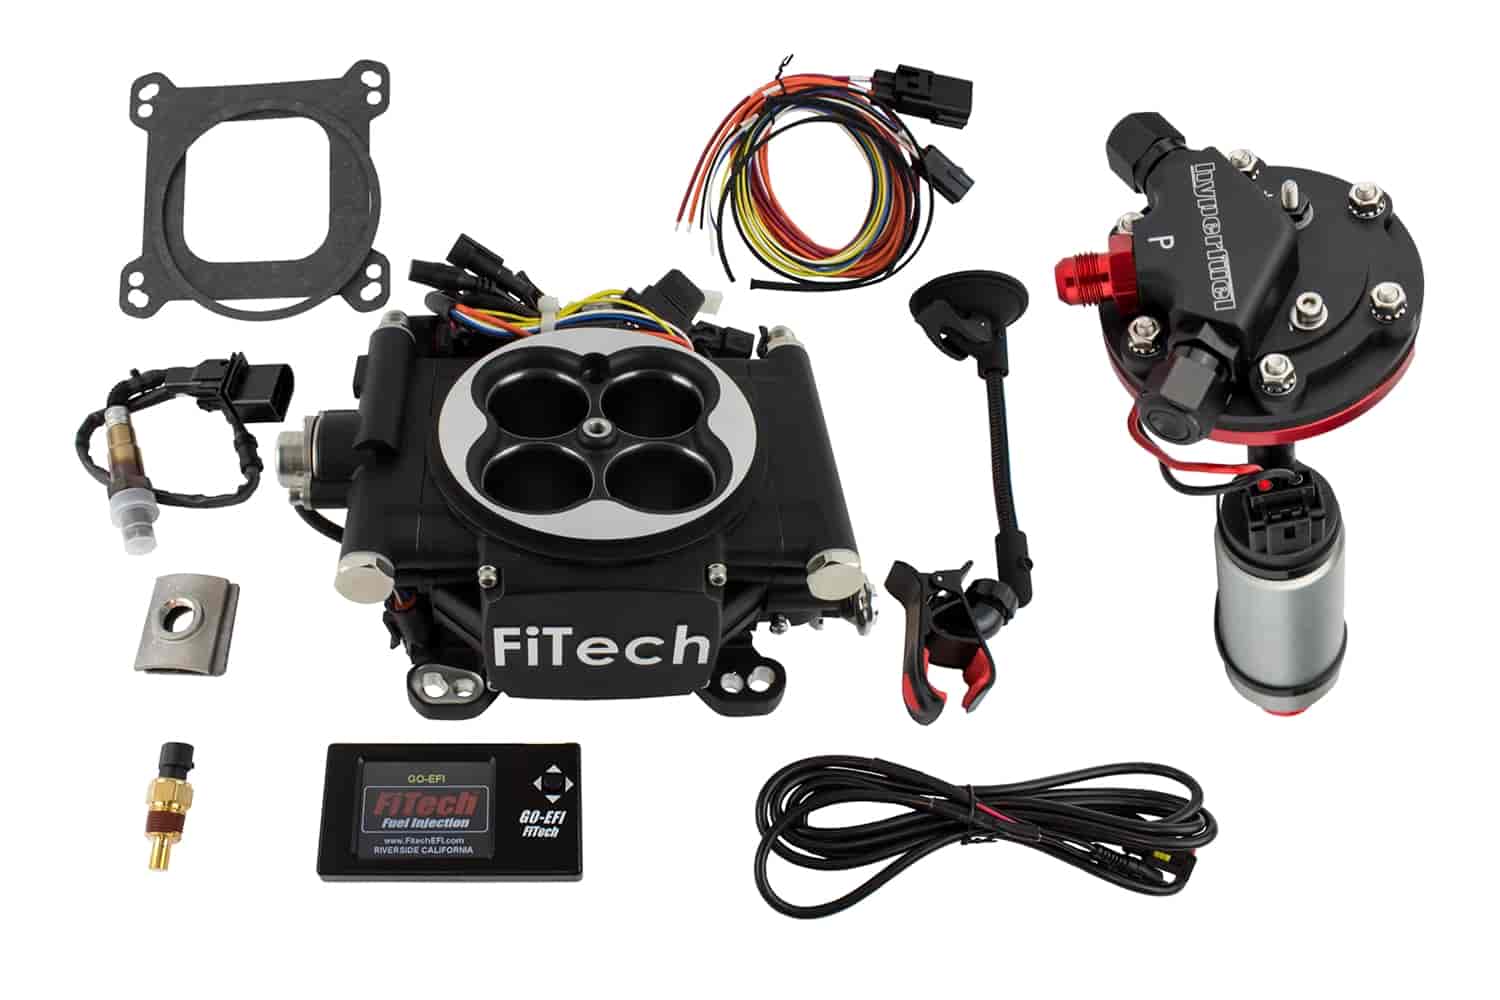 Go EFI-4 600 HP Throttle Body System Master Kit with Hy-Fuel Tight-Fit In-Tank Retrofit Kit